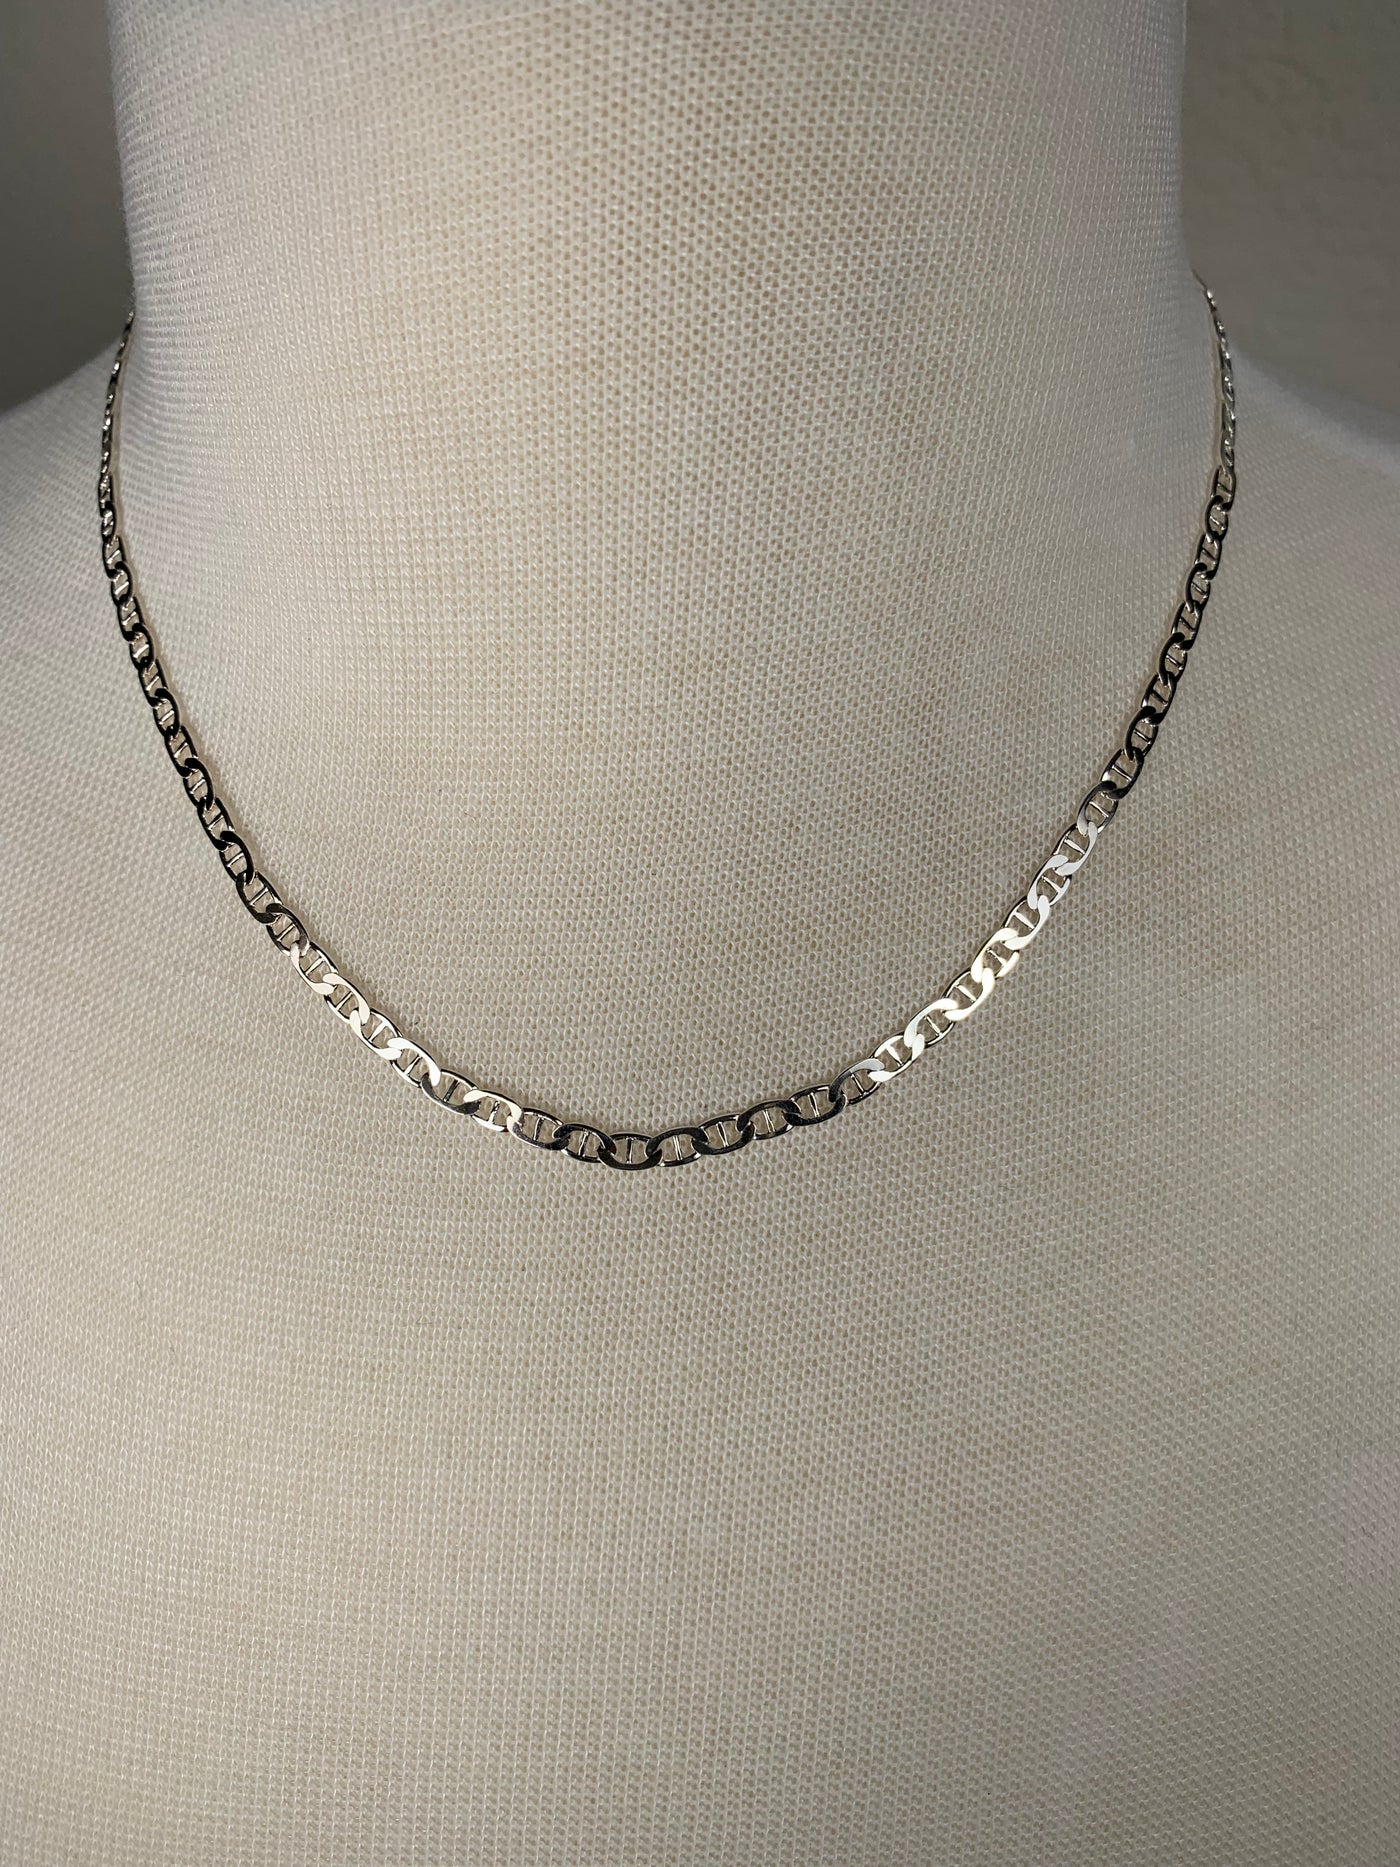 Italian 3.5mm Mariner Chain Necklace in Sterling Silver